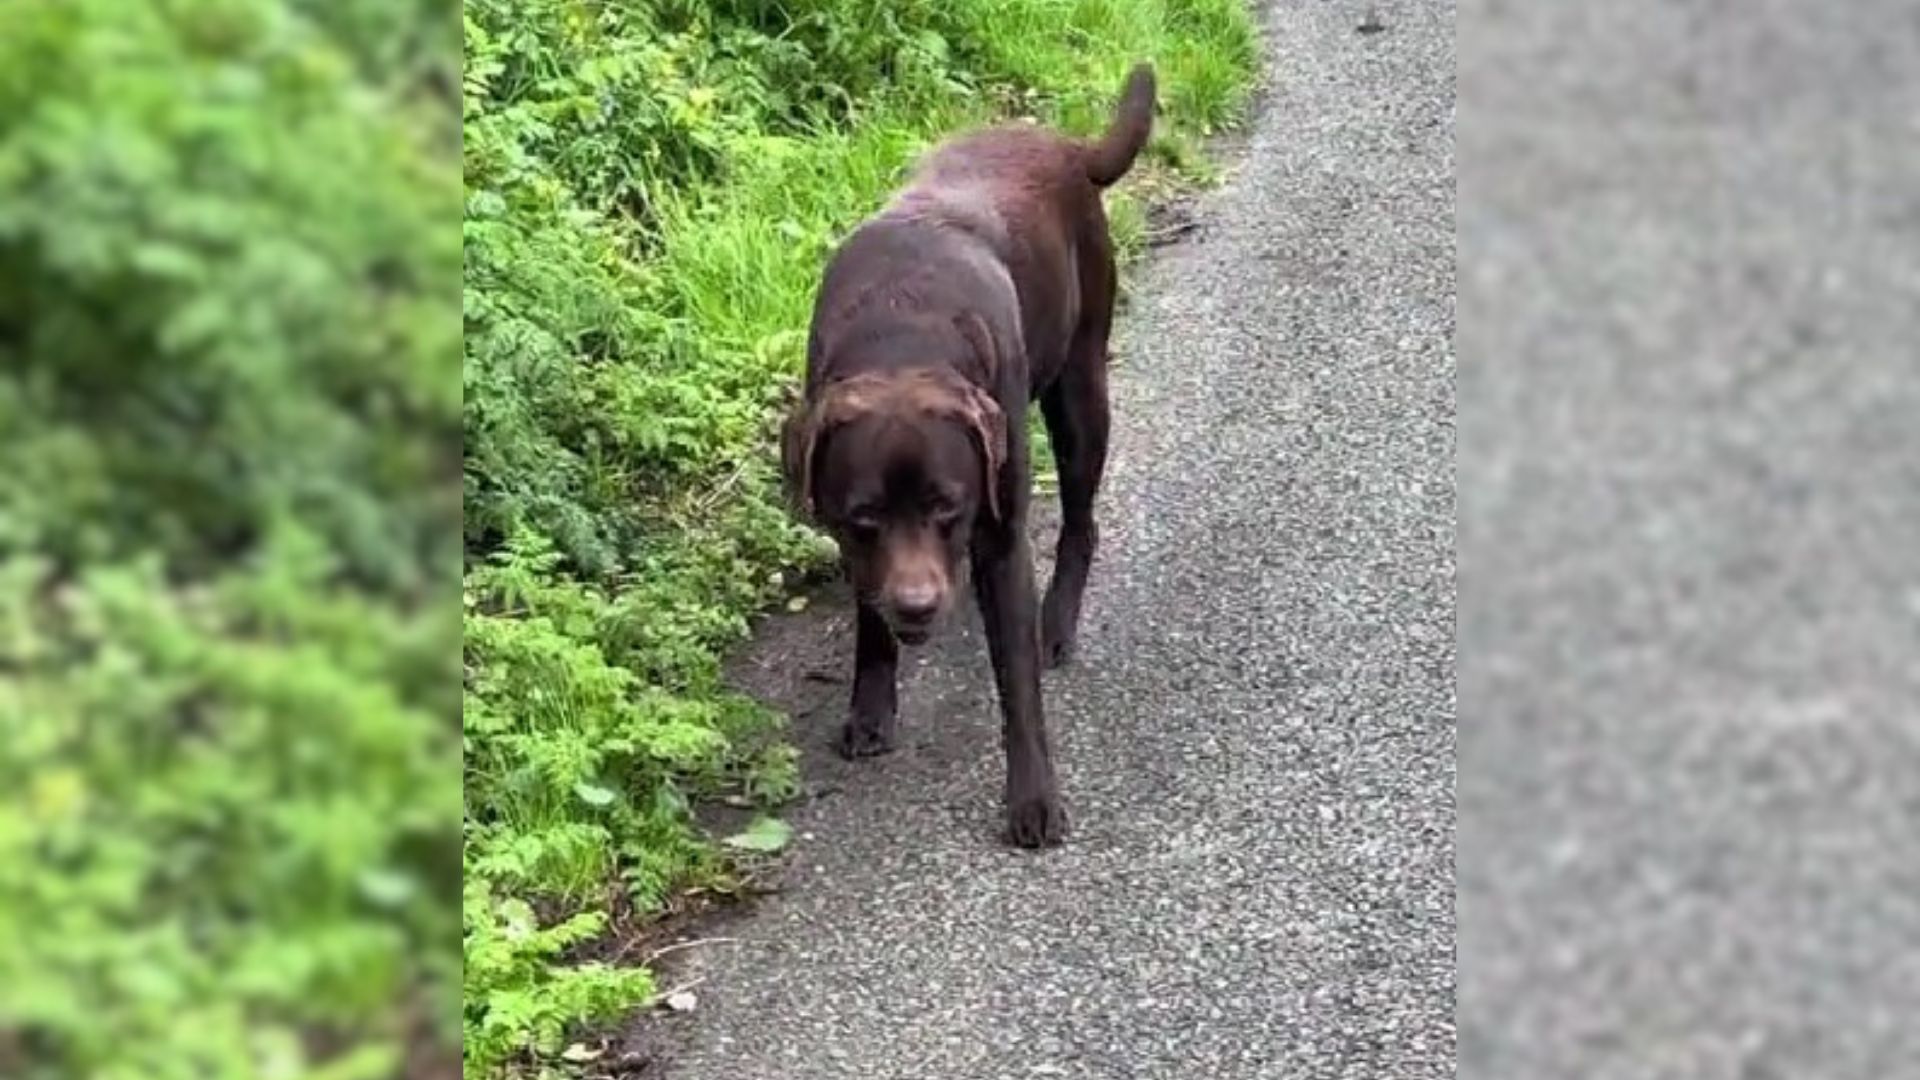 Lazy Labrador Sabotages The Walk By Faking A Leg Injury In A Hilarious Video